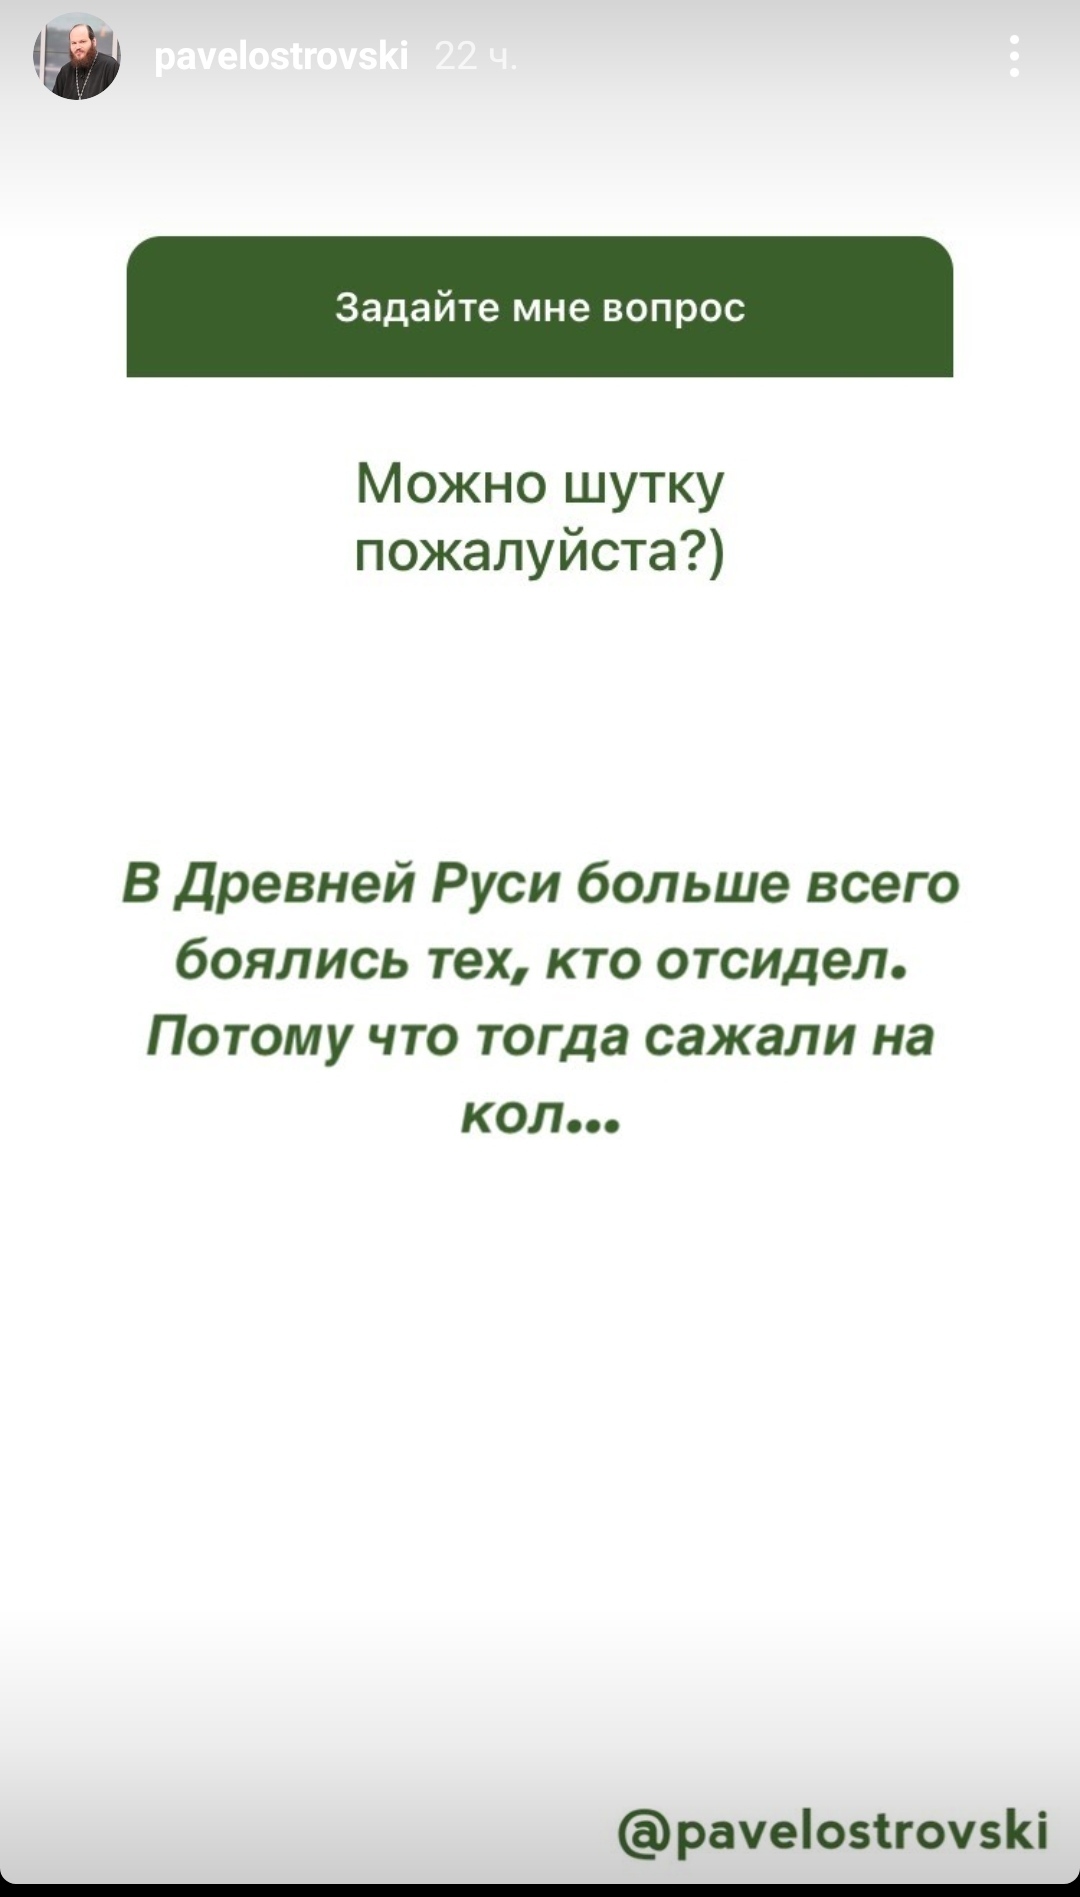 Reply to the post “Humor from an Orthodox priest” - Humor, Priests, Orthodoxy, Instagram, Answer, Reply to post, Longpost, Pavel Ostrovsky